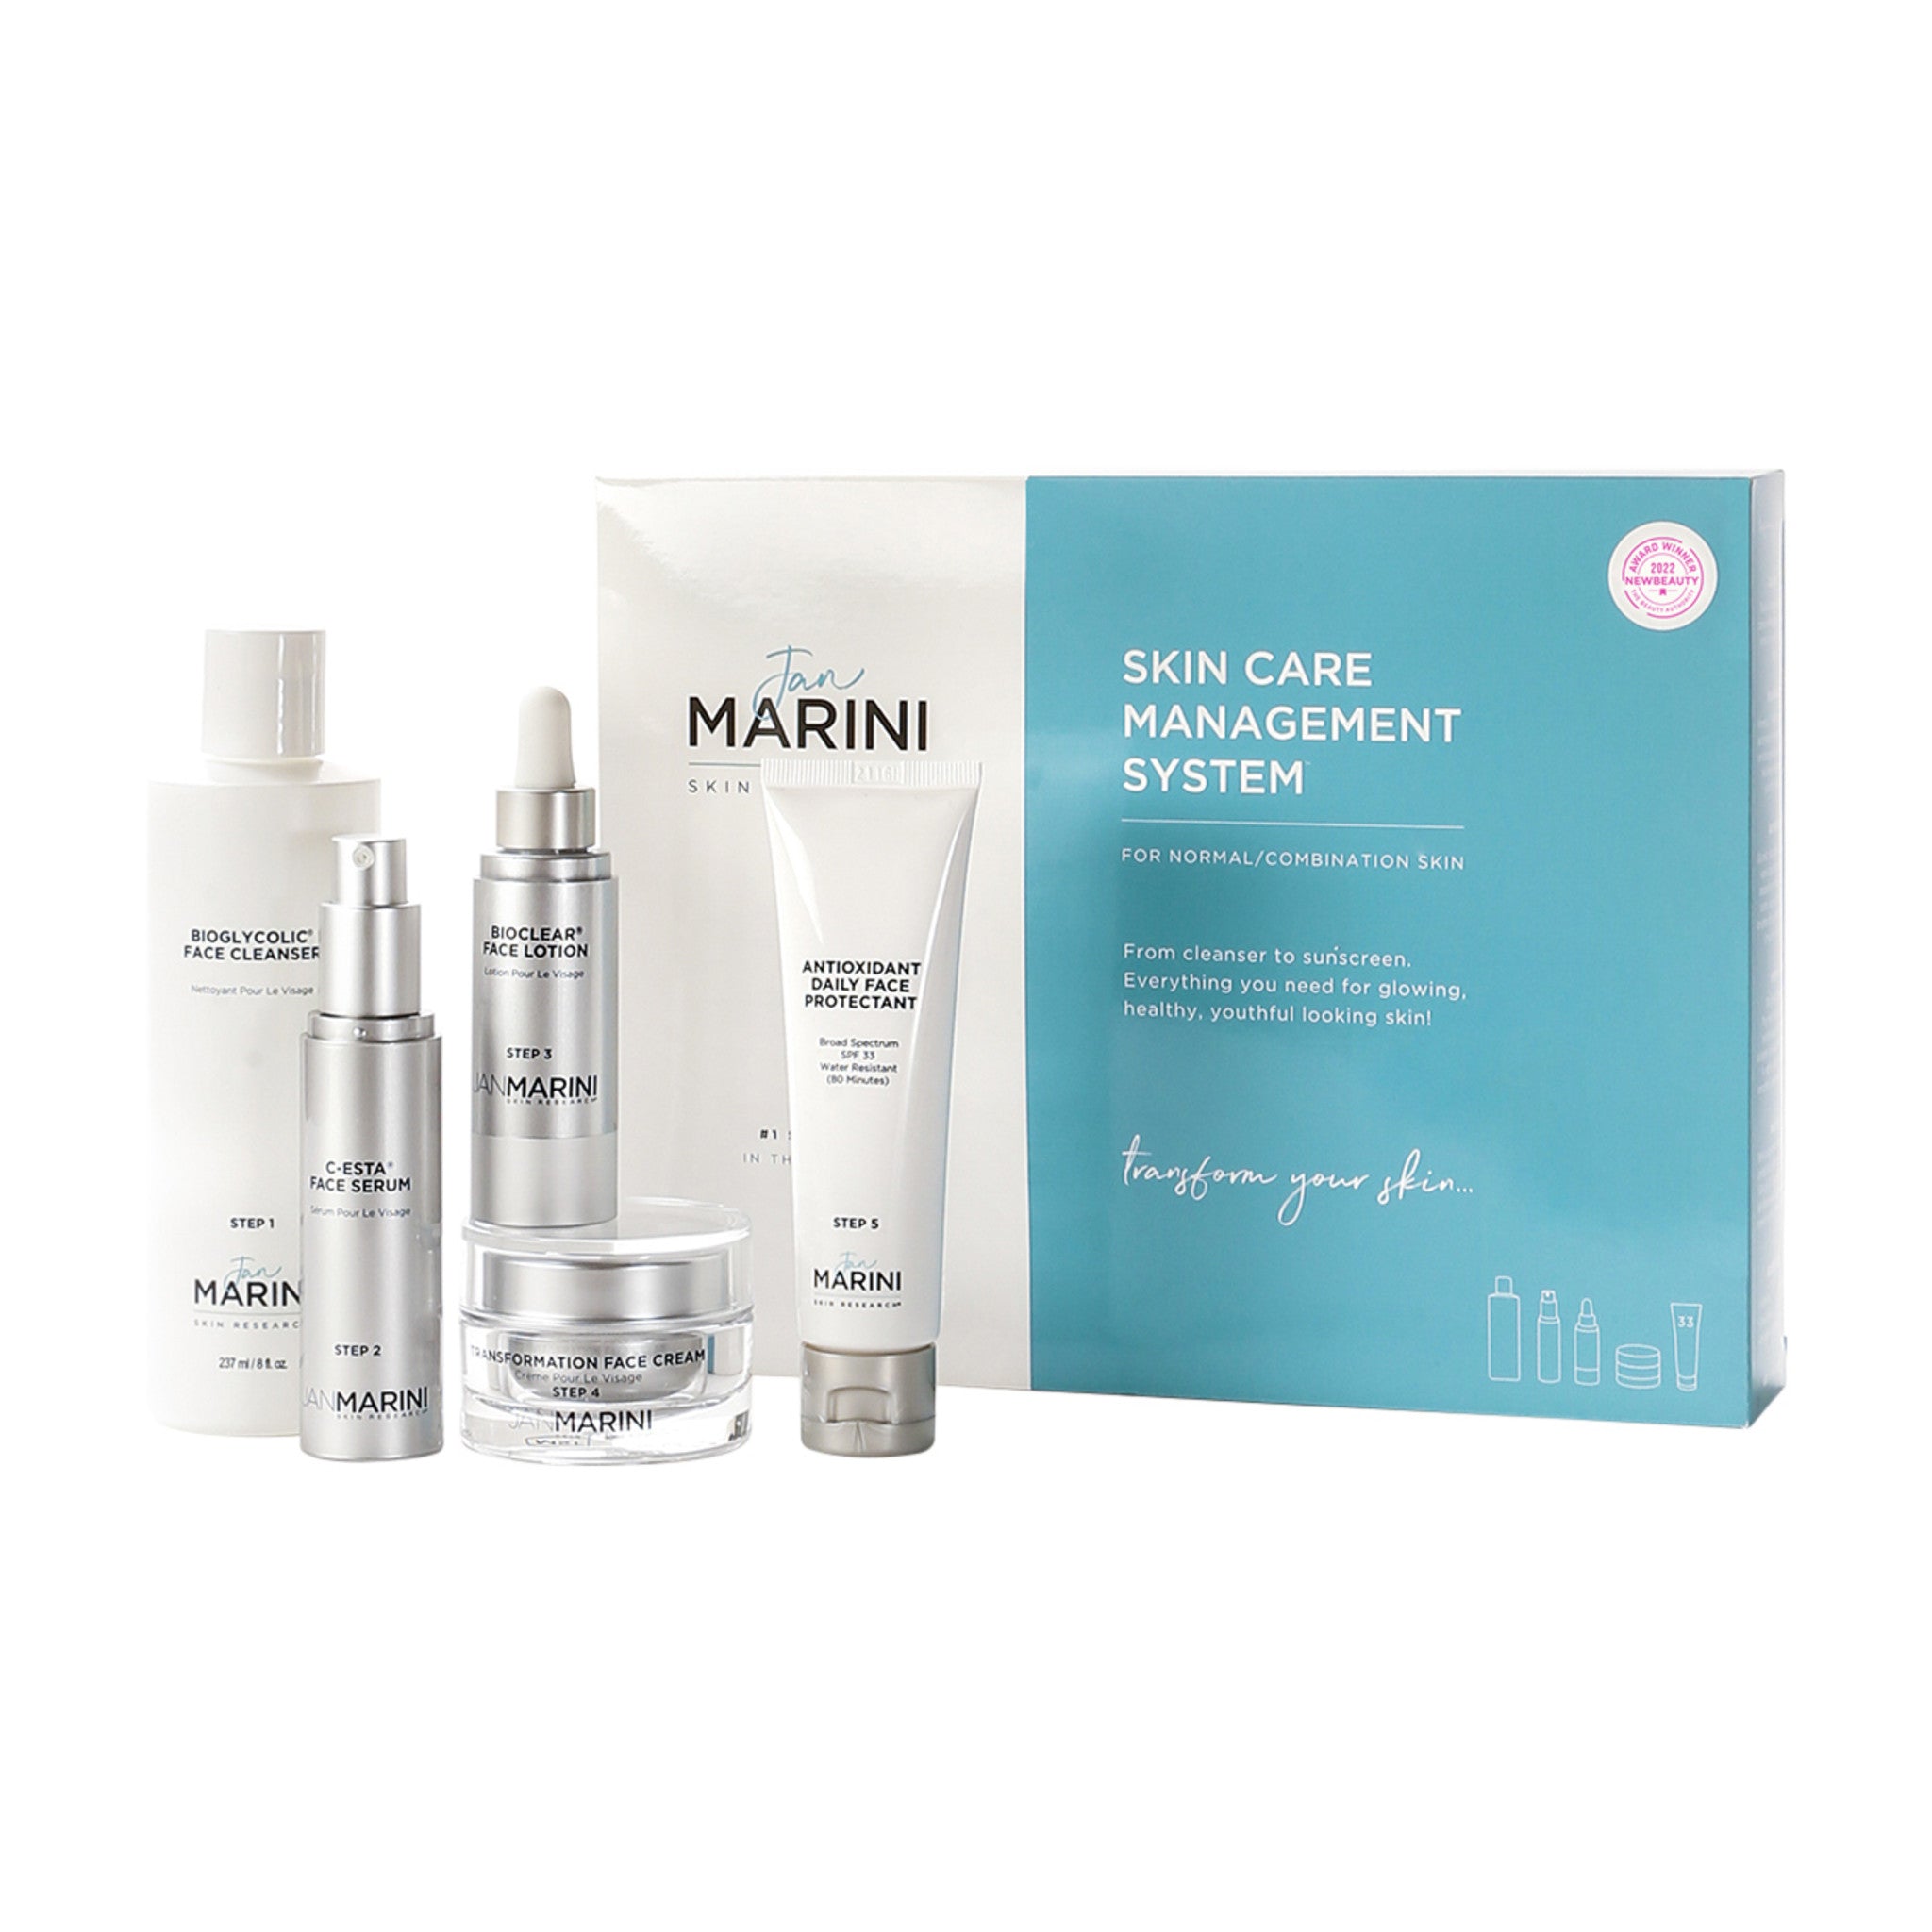 Jan Marini Skin Care Management System Normal or Combination Skin with Antioxidant Daily Face Protectant SPF 33 Size variant: main image.